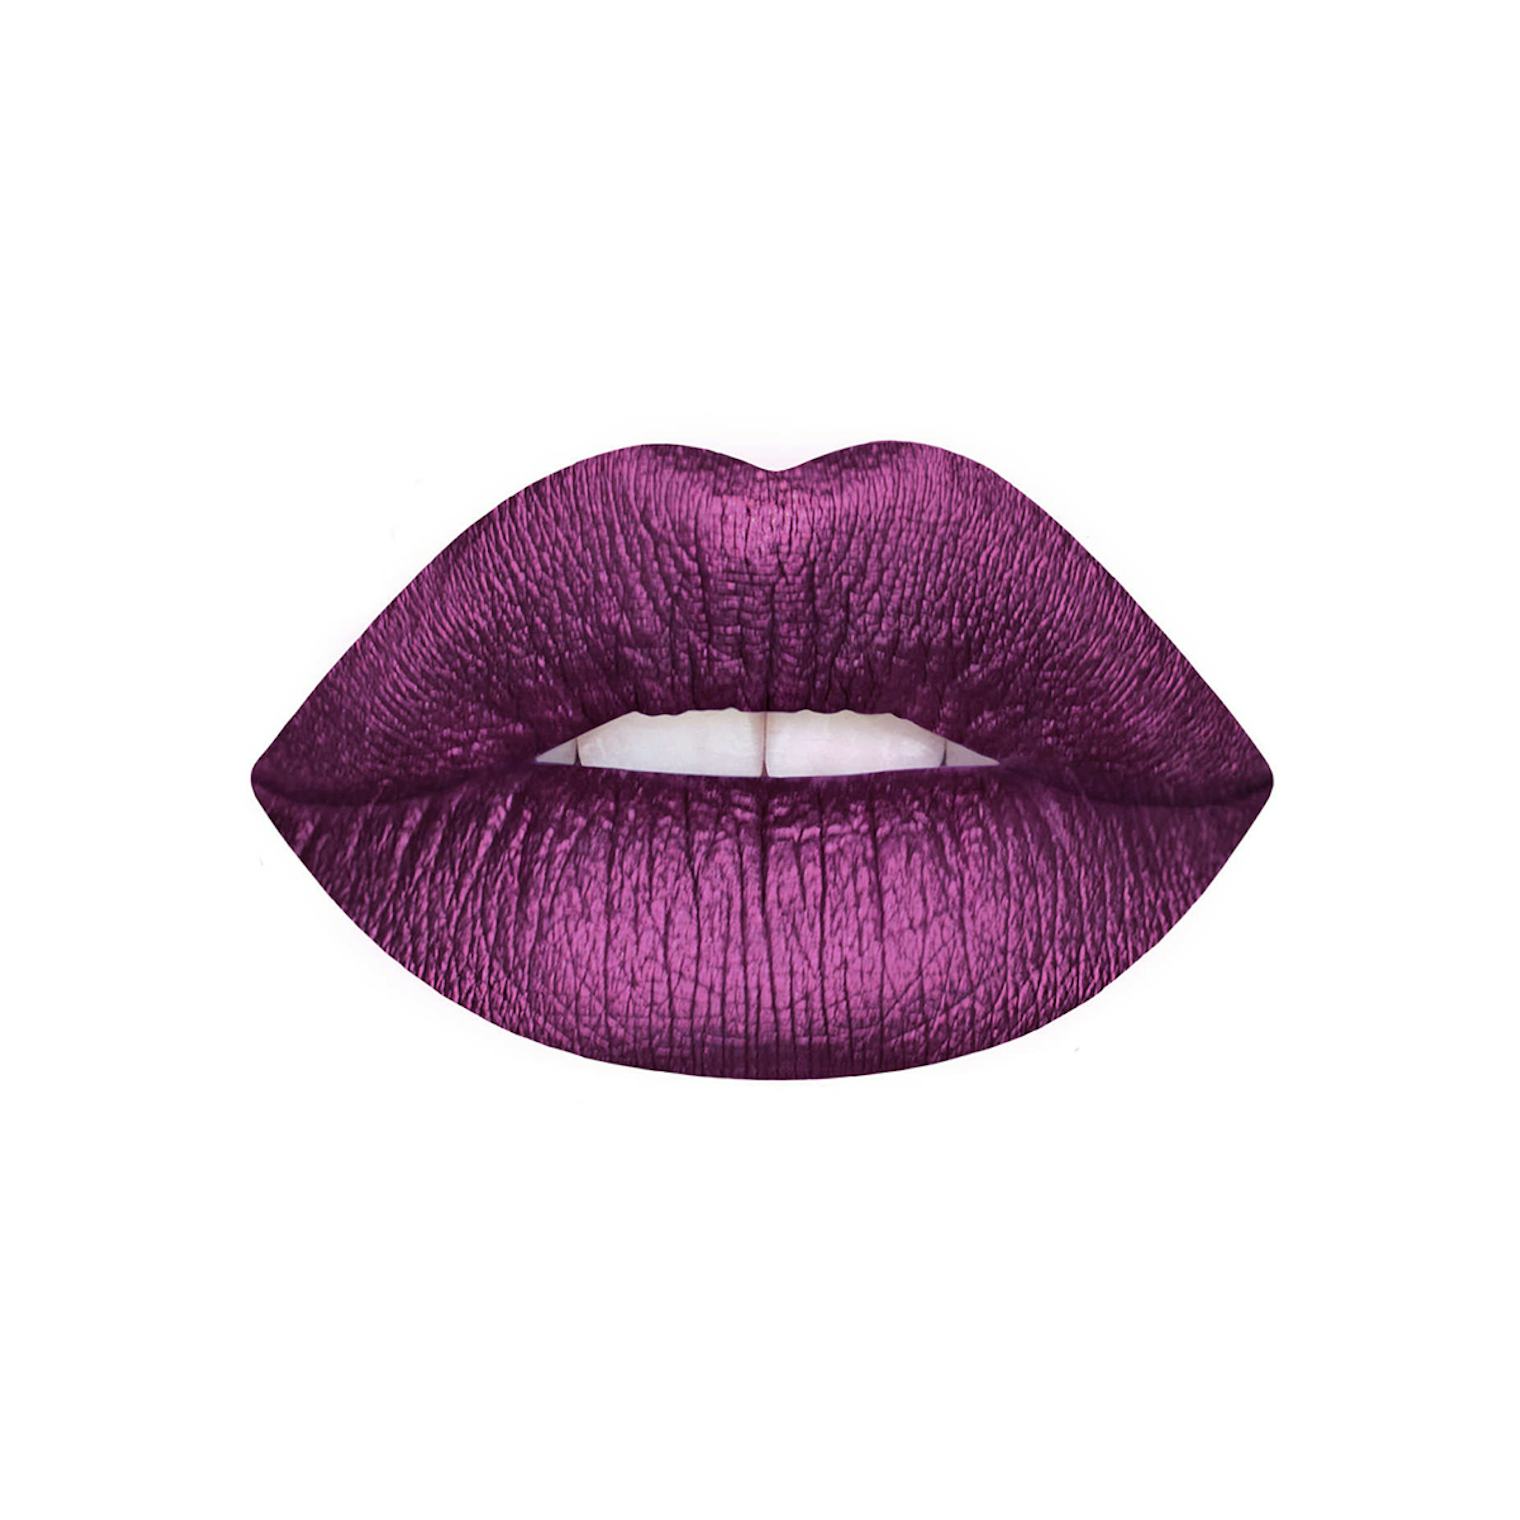 Frost Your Lips This Winter With These 11 Metallic Lipsticks